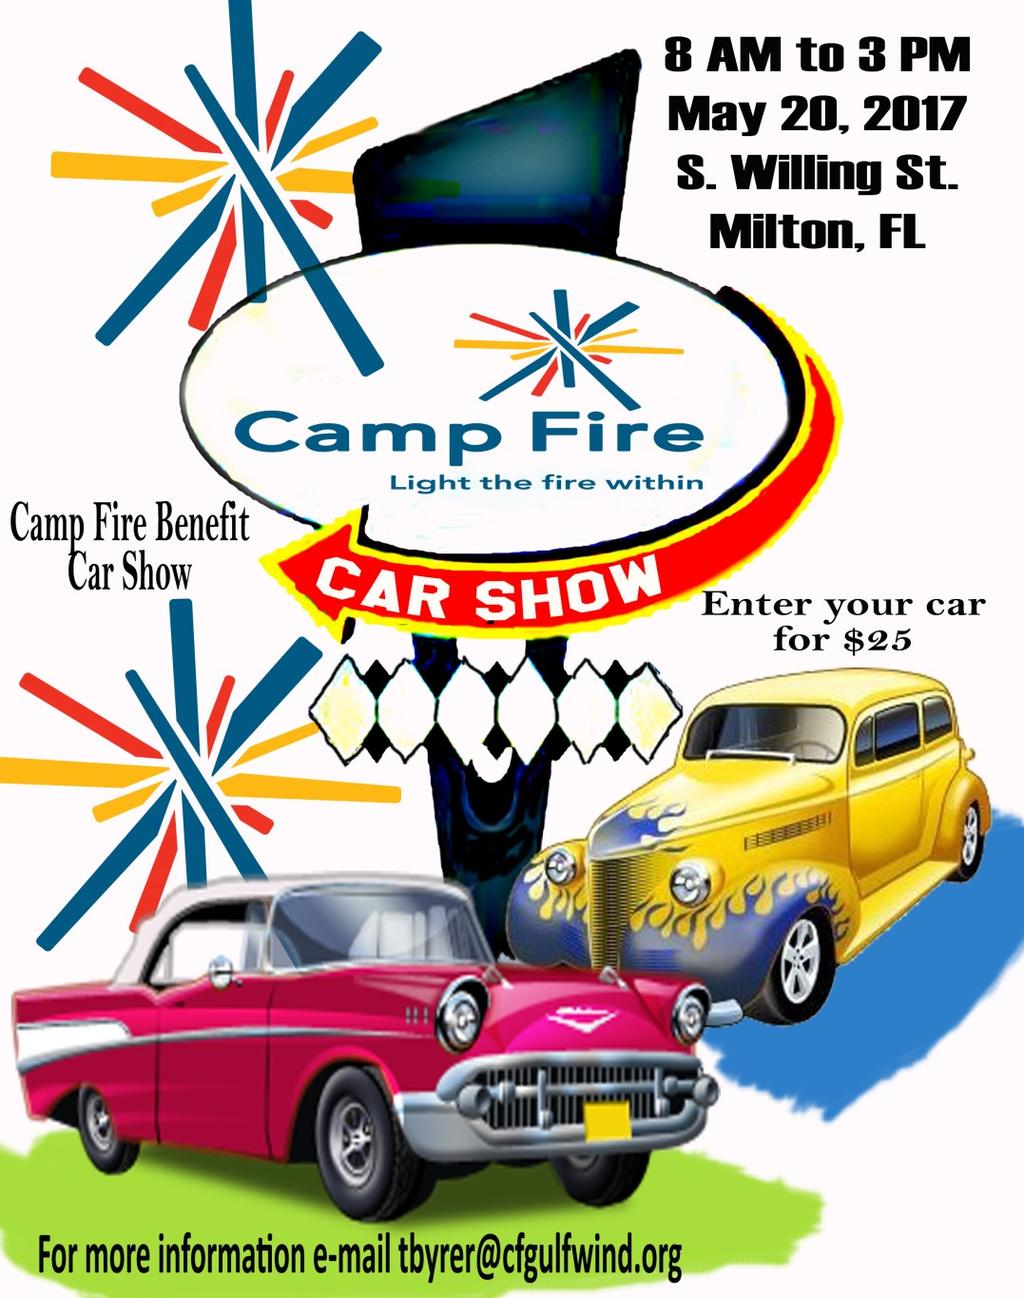 Camp Fire Calendar April 2017 National Child Abusse Prevention Month 4/9 Palm Sunday 4/14 Good Friday.